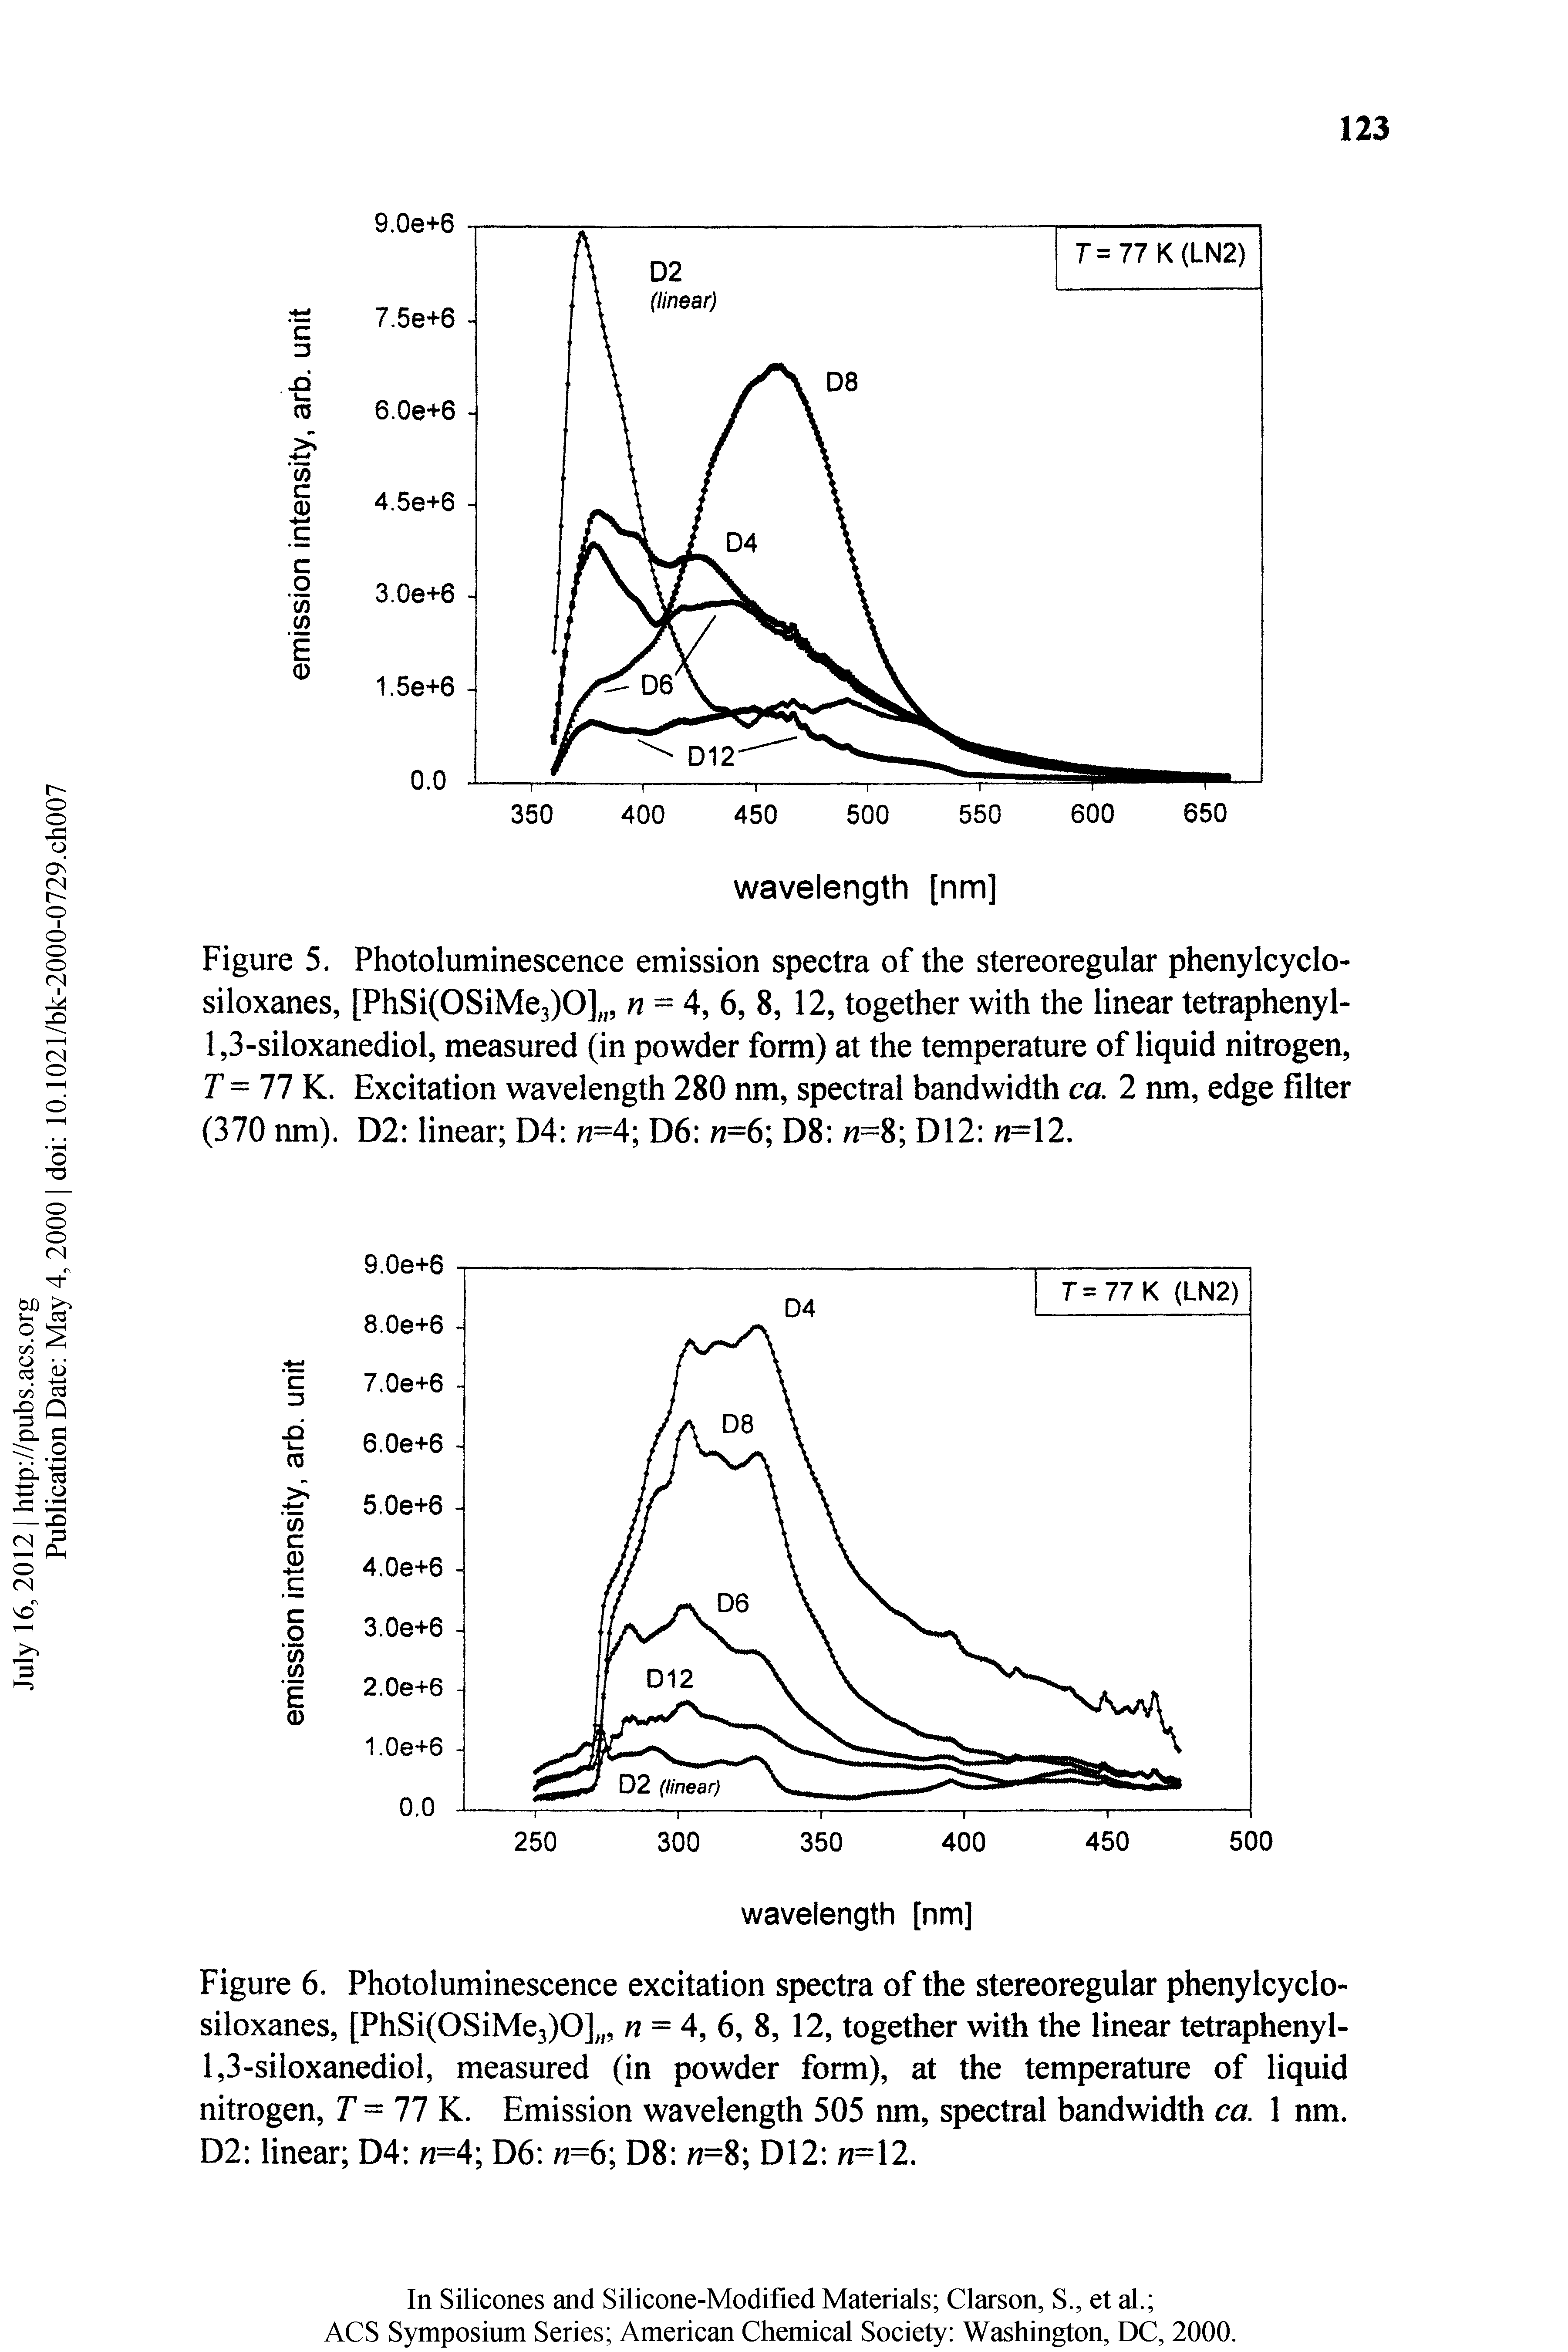 Figure 6. Photoluminescence excitation spectra of the stereoregular phenylcyclo-siloxanes, [PhSi(0SiMe3)0], n = 4, 6, 8, 12, together with the linear tetraphenyl-1,3-siloxanediol, measured (in powder form), at the temperature of liquid nitrogen, T = 77 K. Emission wavelength 505 nm, spectral bandwidth ca. 1 nm. D2 linear D4 n=4 D6 n=6 D8 =8 D12 n= 2.